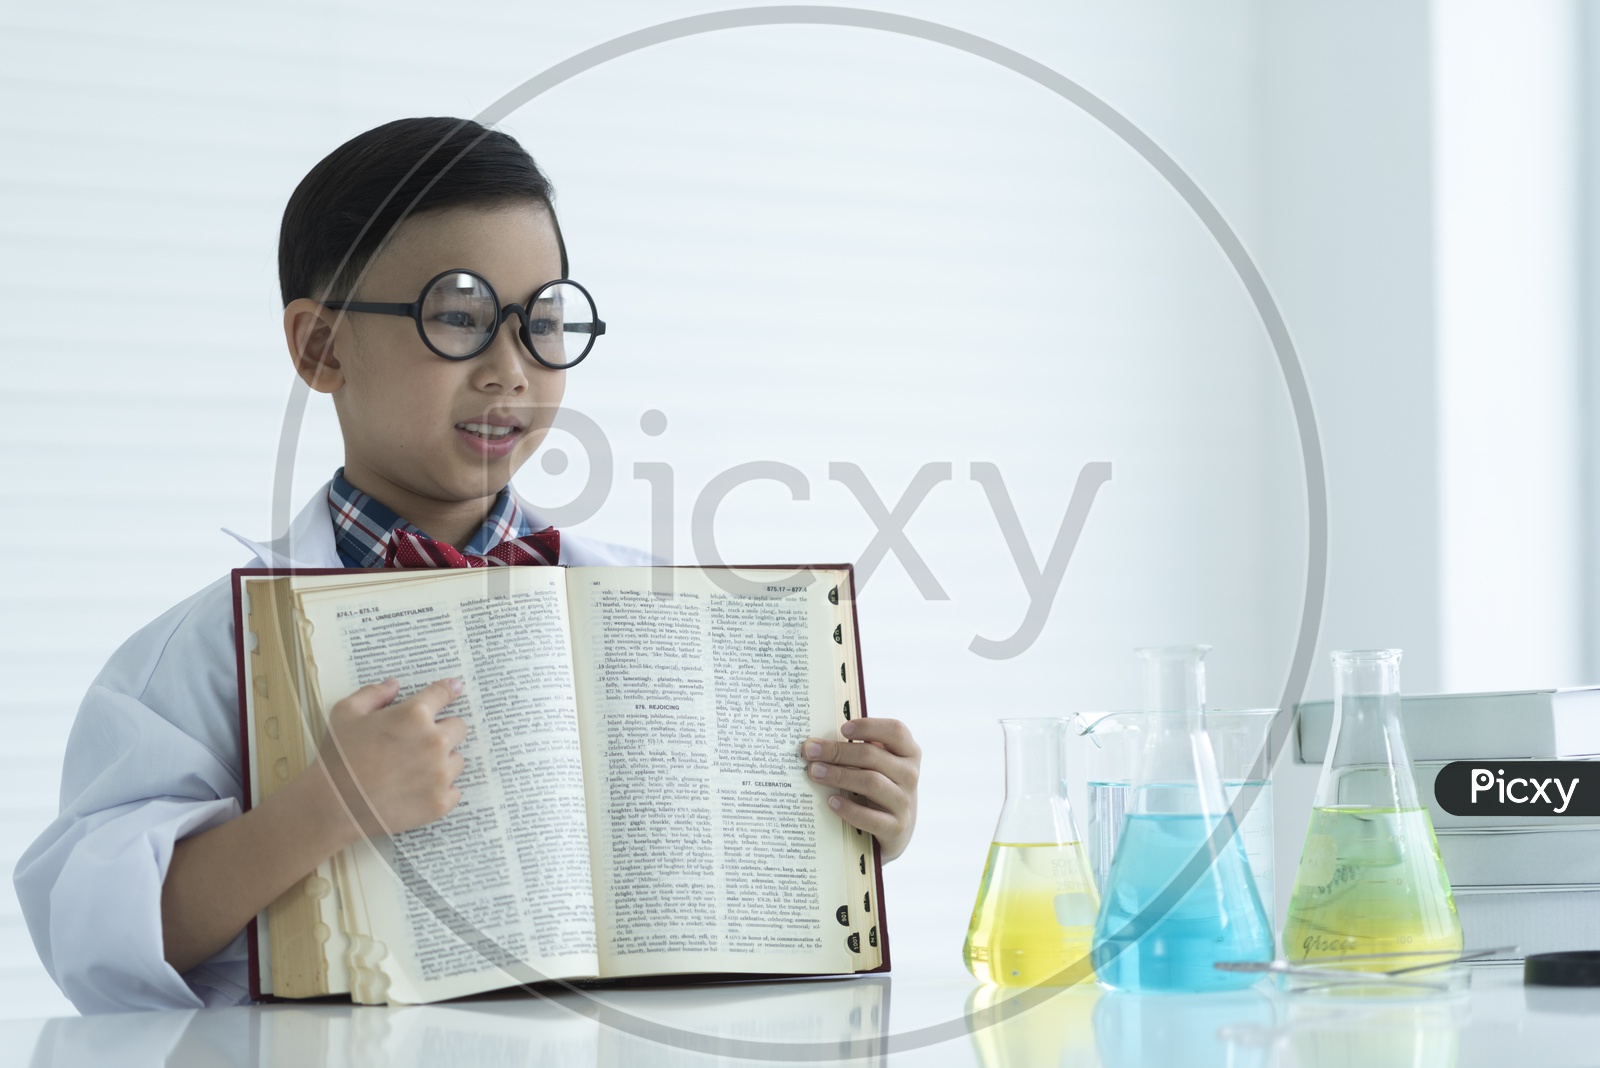 A Young Thai Boy  or Child Student Refering Books Wearing White Apron in a Chemical research Lab